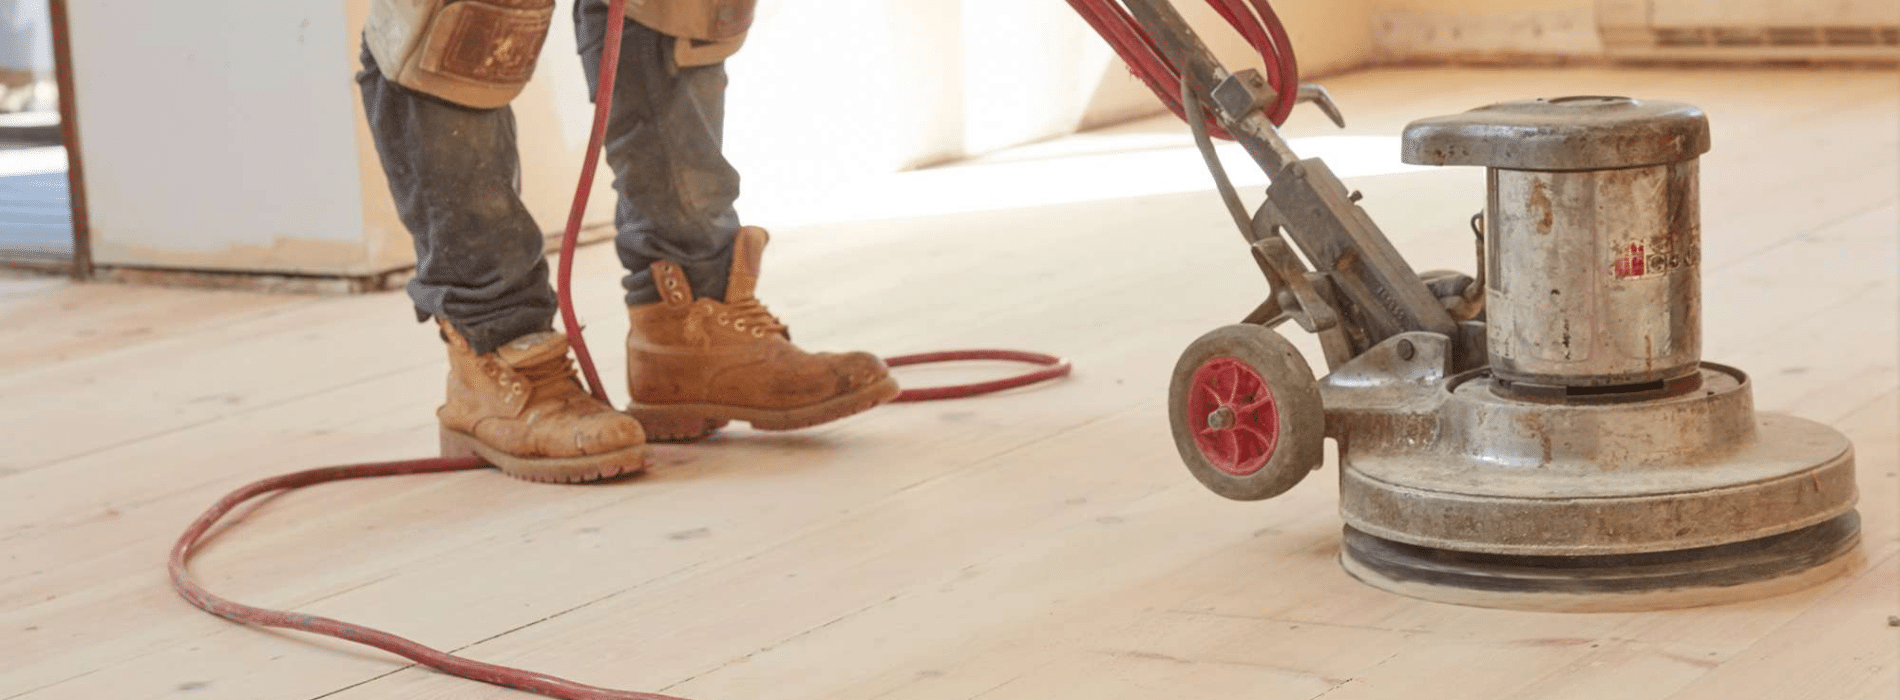 A floor sanding professional using a Bona FlexiSand 1.9, a powerful buffer sander with a 407 mm diameter. The sander is connected to a dust extraction system with a HEPA filter, ensuring efficient and thorough sanding. The setup operates at 230 V and 50 Hz/60 Hz in New Cross, SE14.